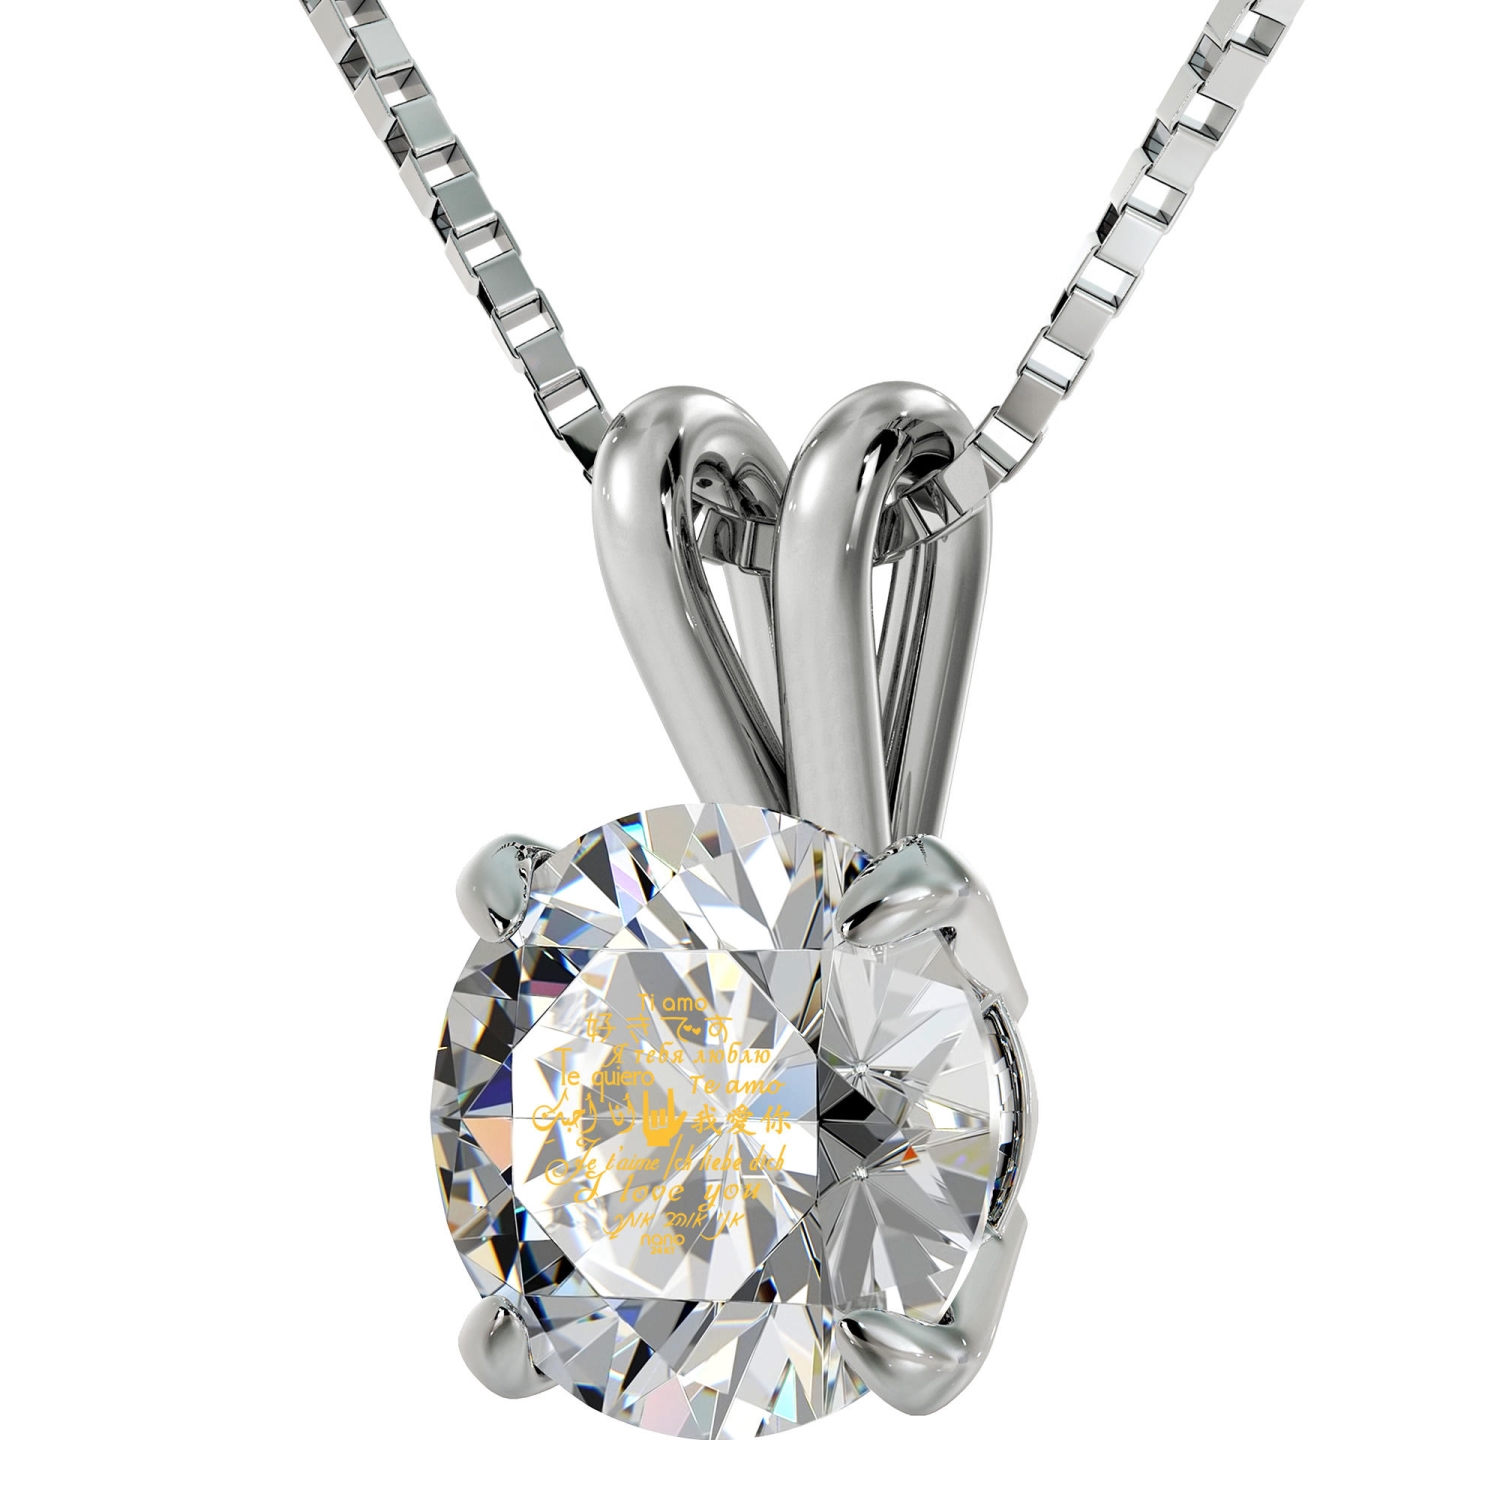 "I Love You" in 12 Languages: Sterling Silver and Swarovski Stone Necklace Micro-Inscribed with 24K Gold - 1